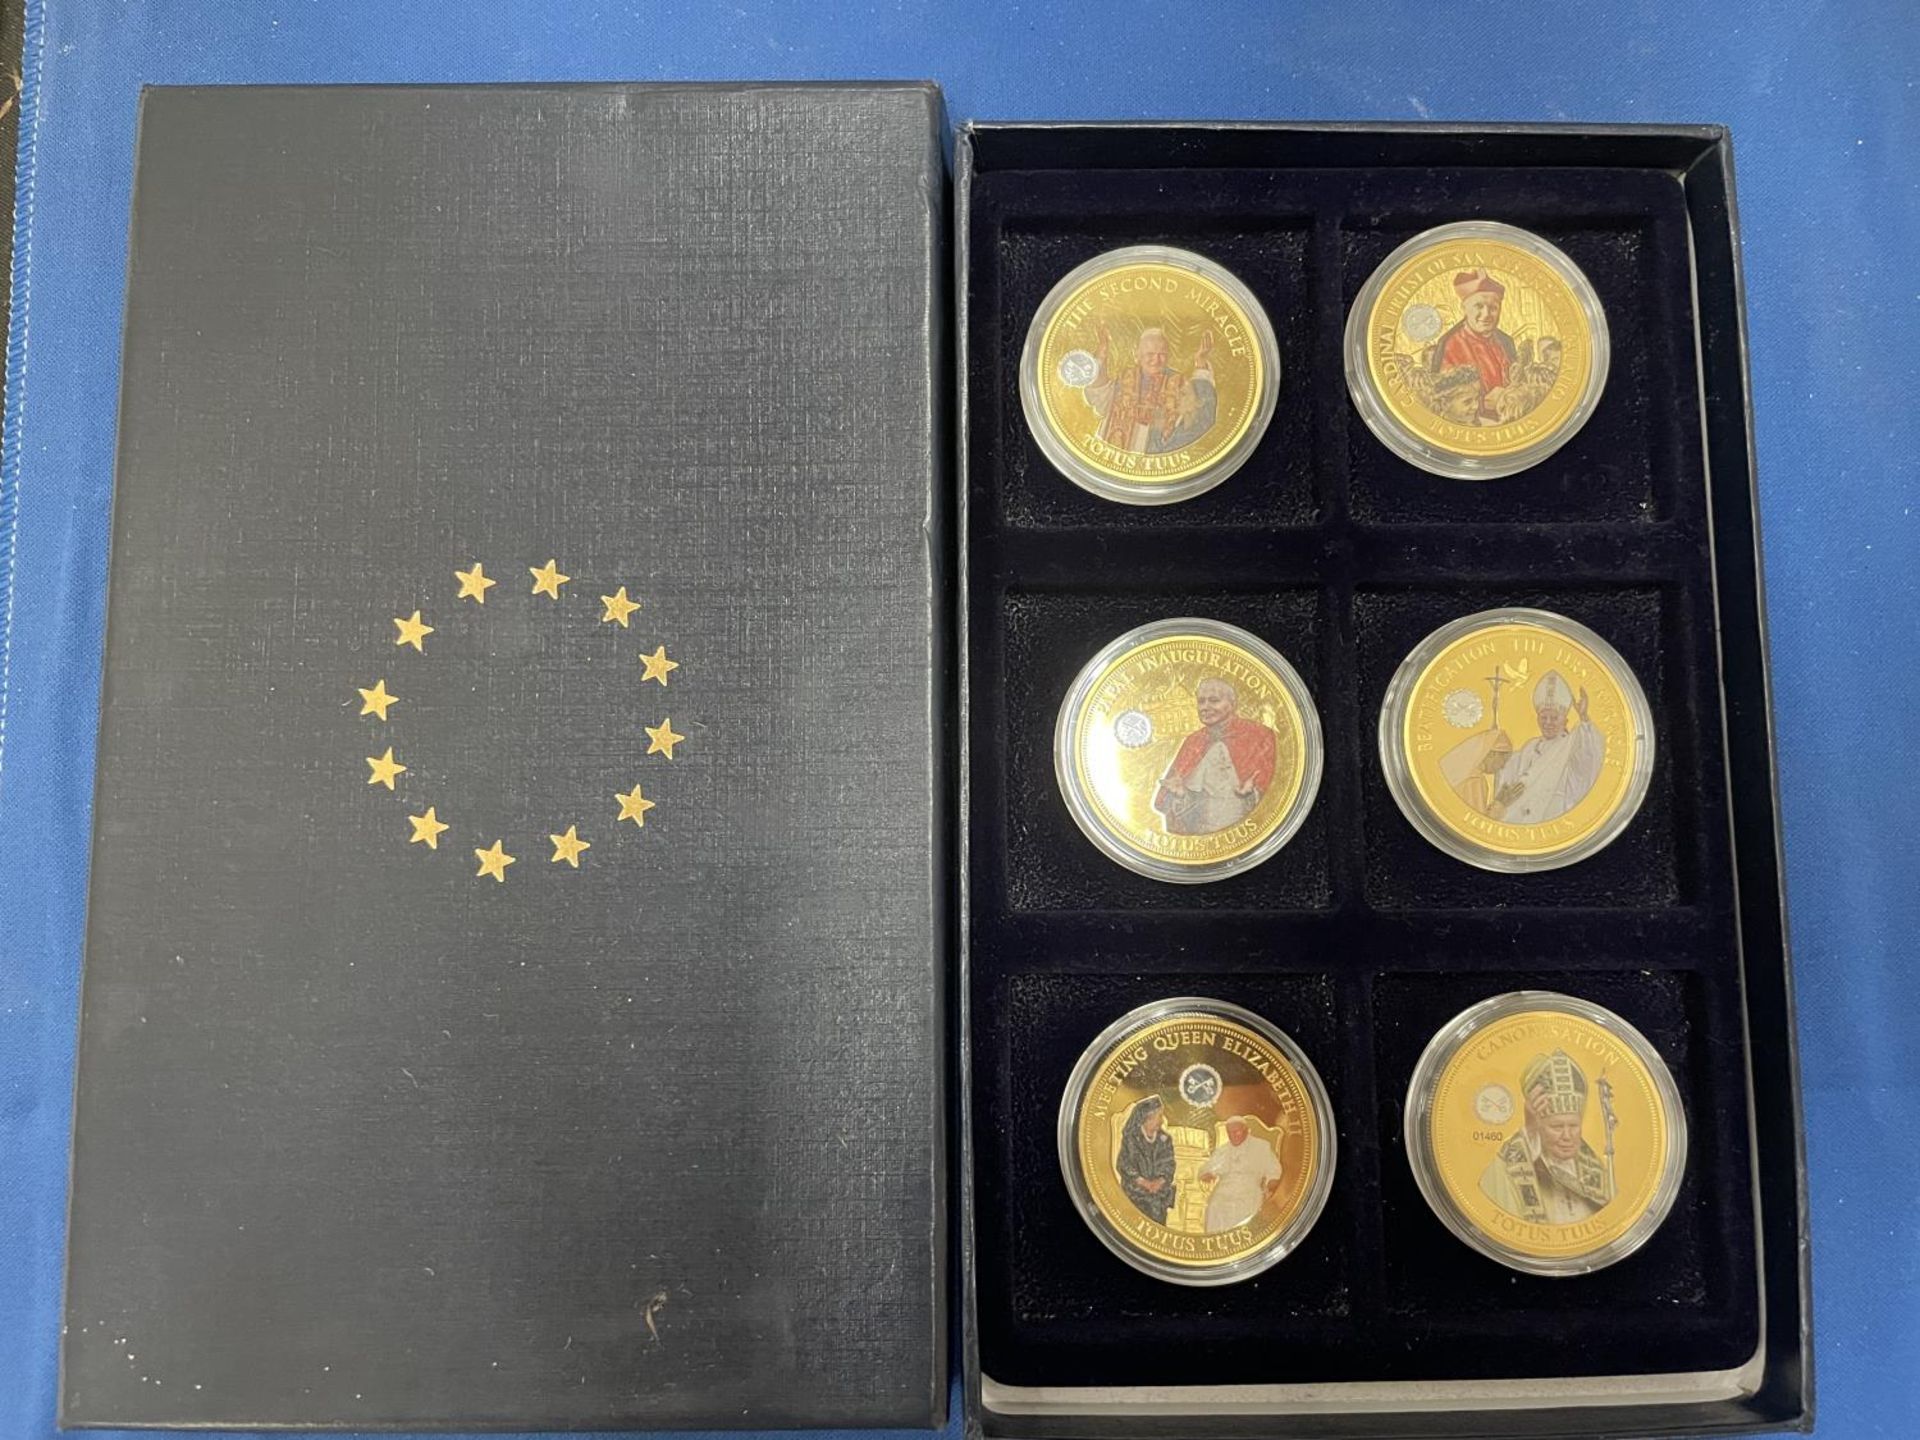 A SET OF SIX LIMITED EDITION GOLD PLATED COINS DEPICTING POPE IN 2014 BY THE EU COMMISSION AND THE